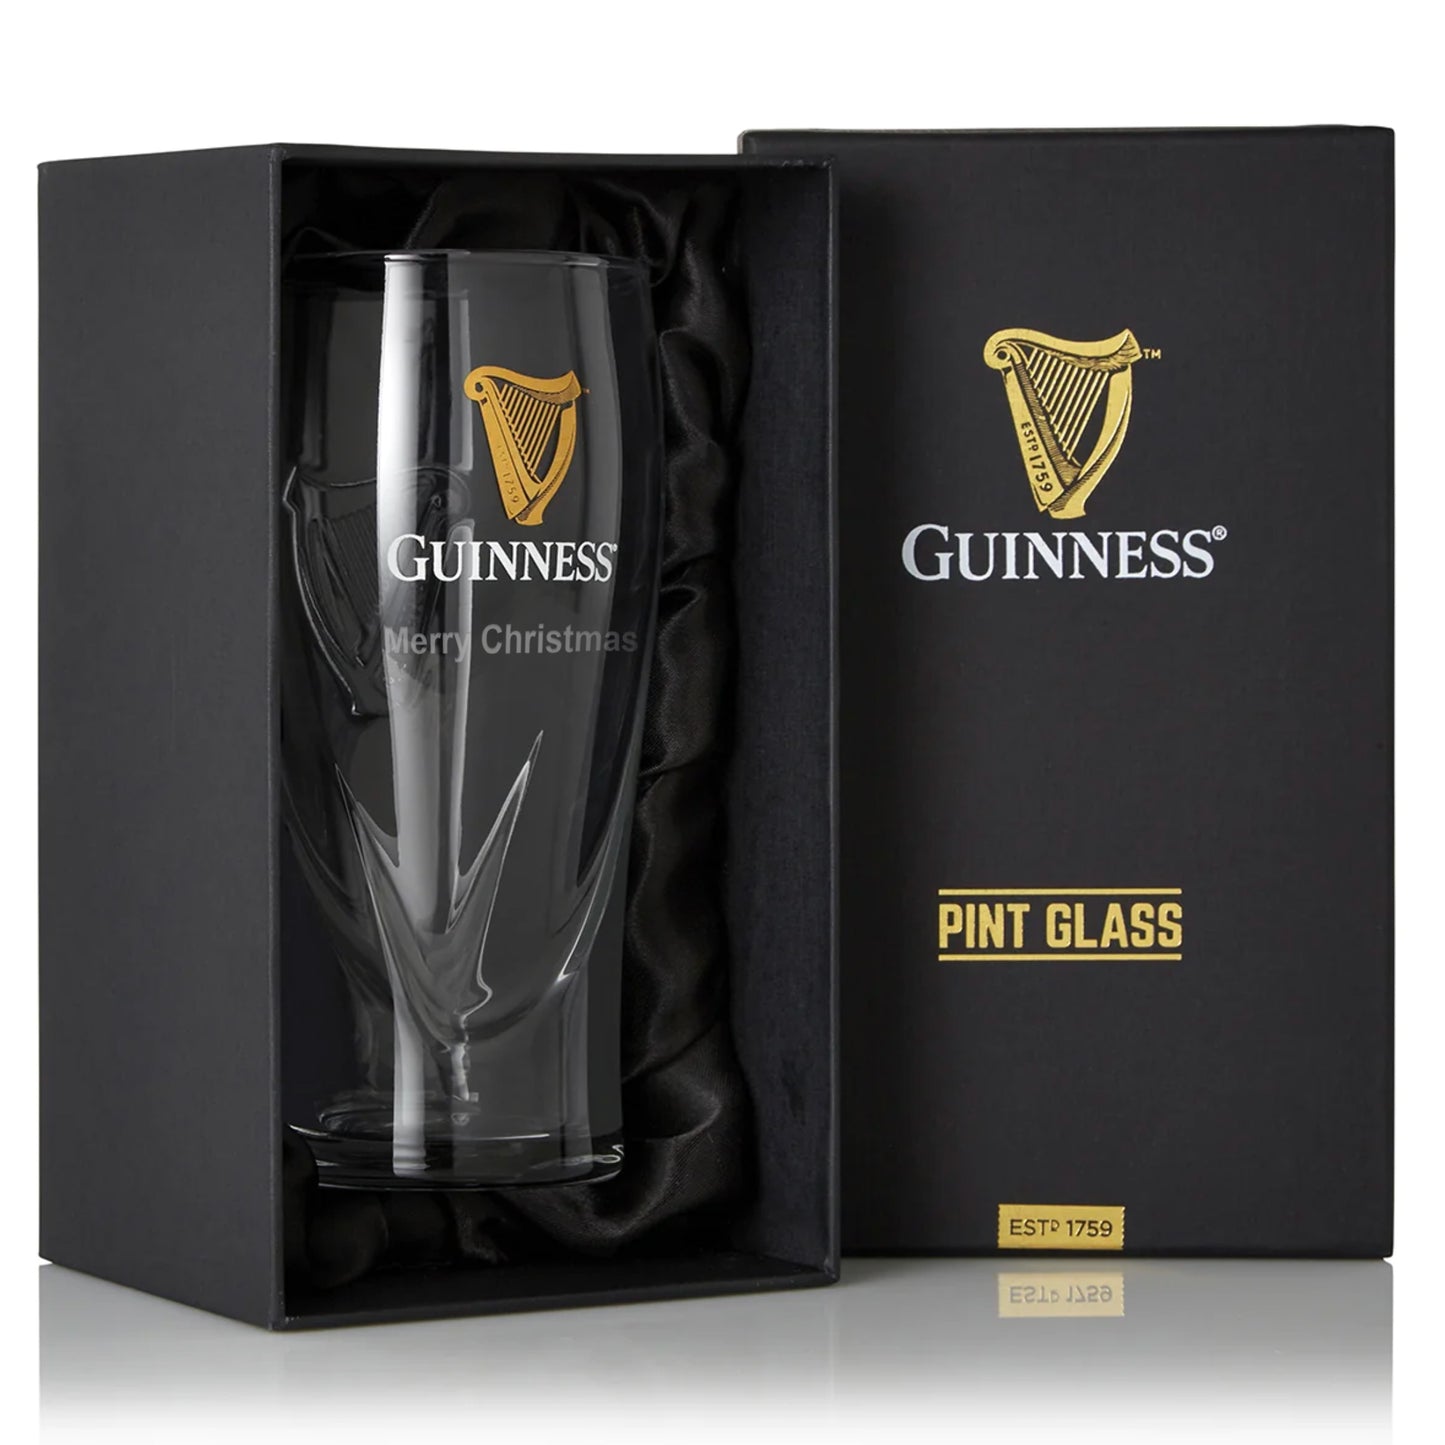 Guinness Pint Glass in a box.